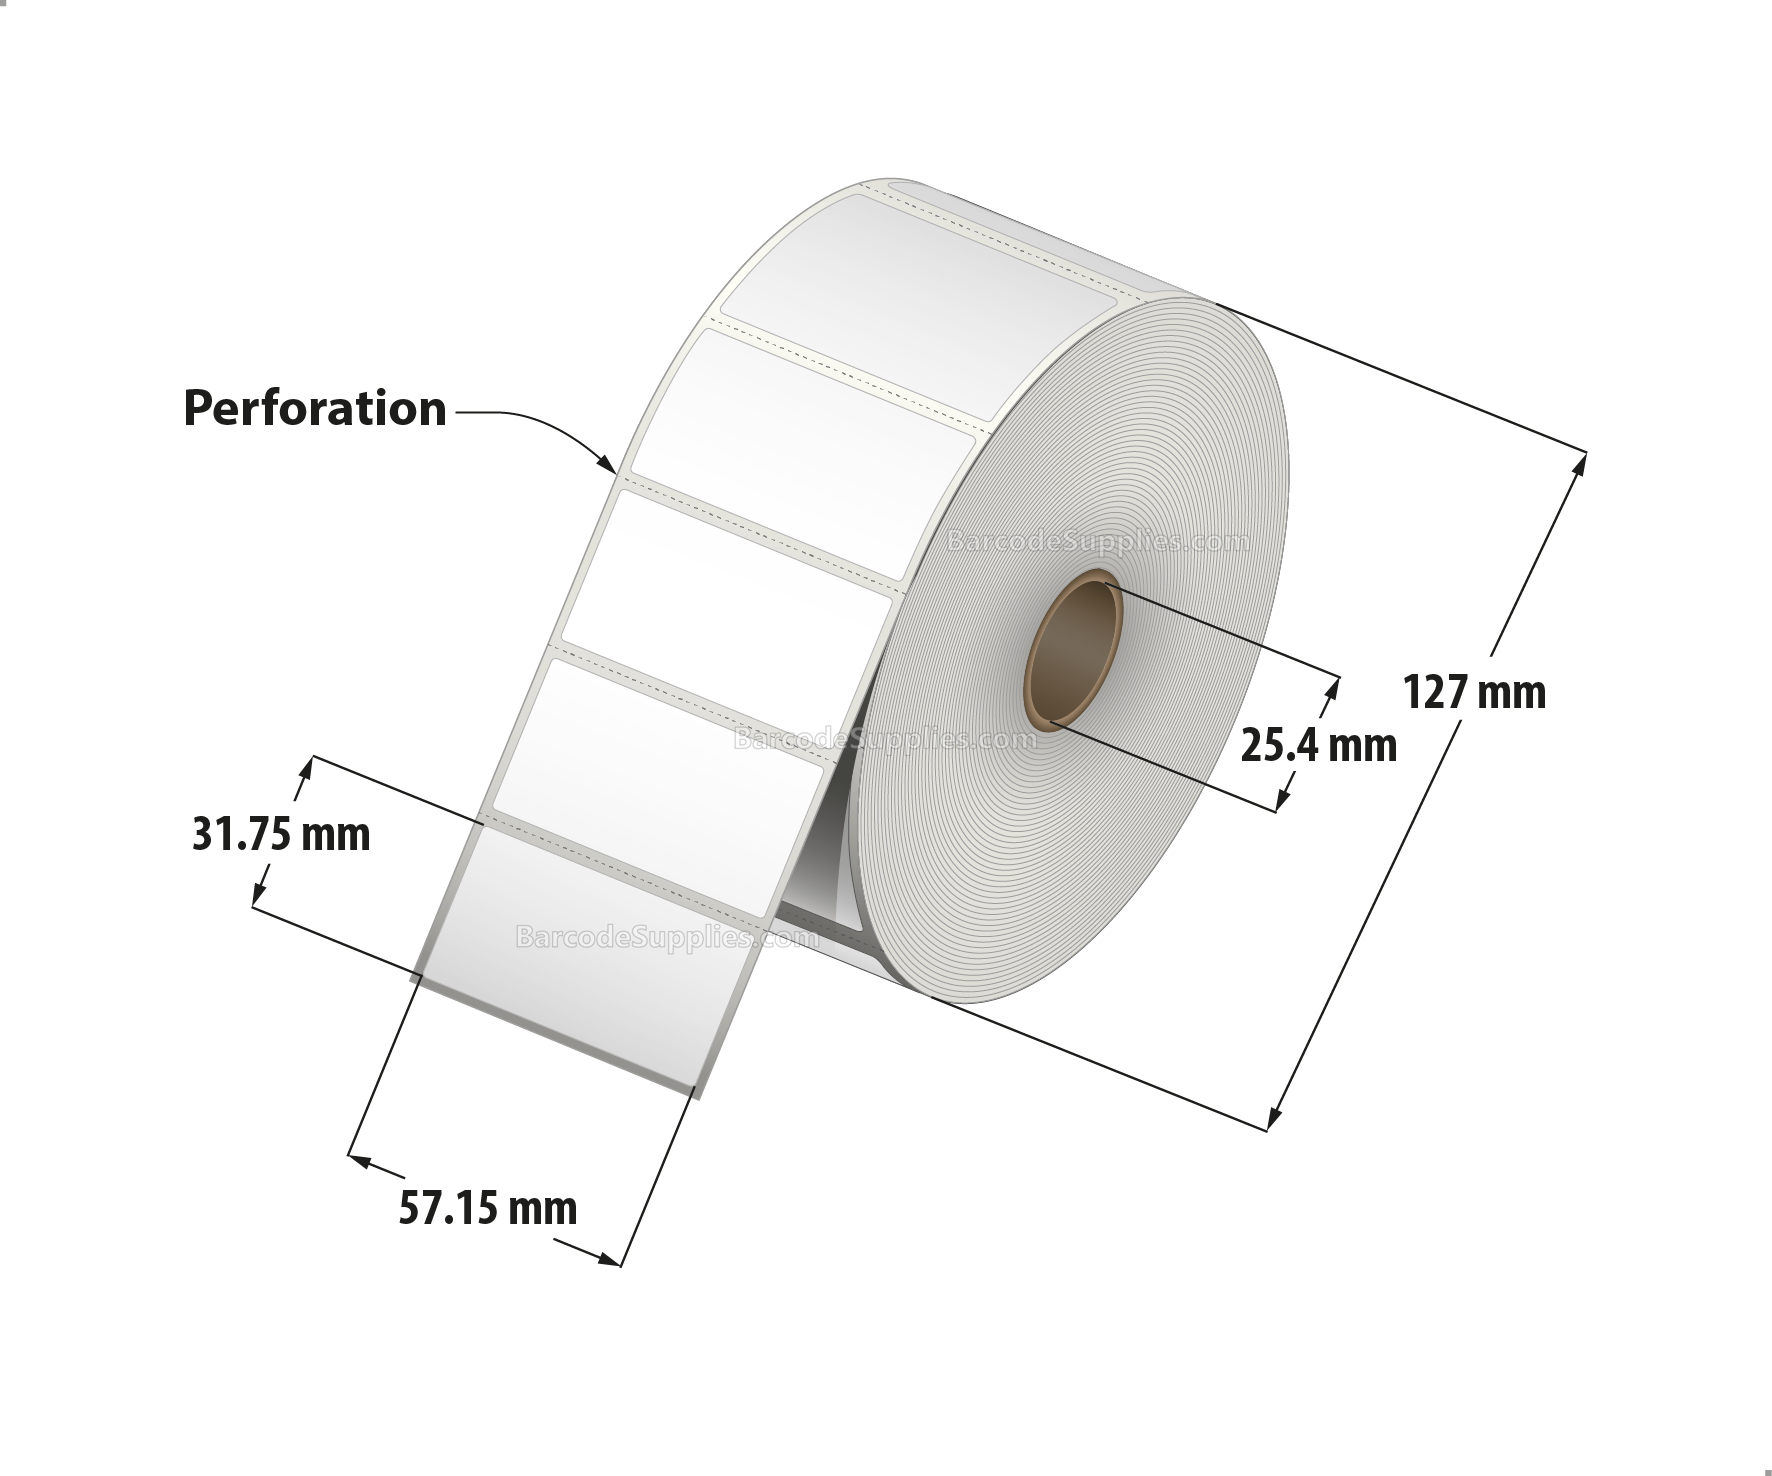 2.25 x 1.25 Thermal Transfer White Labels With Rubber Adhesive - Perforated - 2100 Labels Per Roll - Carton Of 12 Rolls - 25200 Labels Total - MPN: RTT5-225125-1P